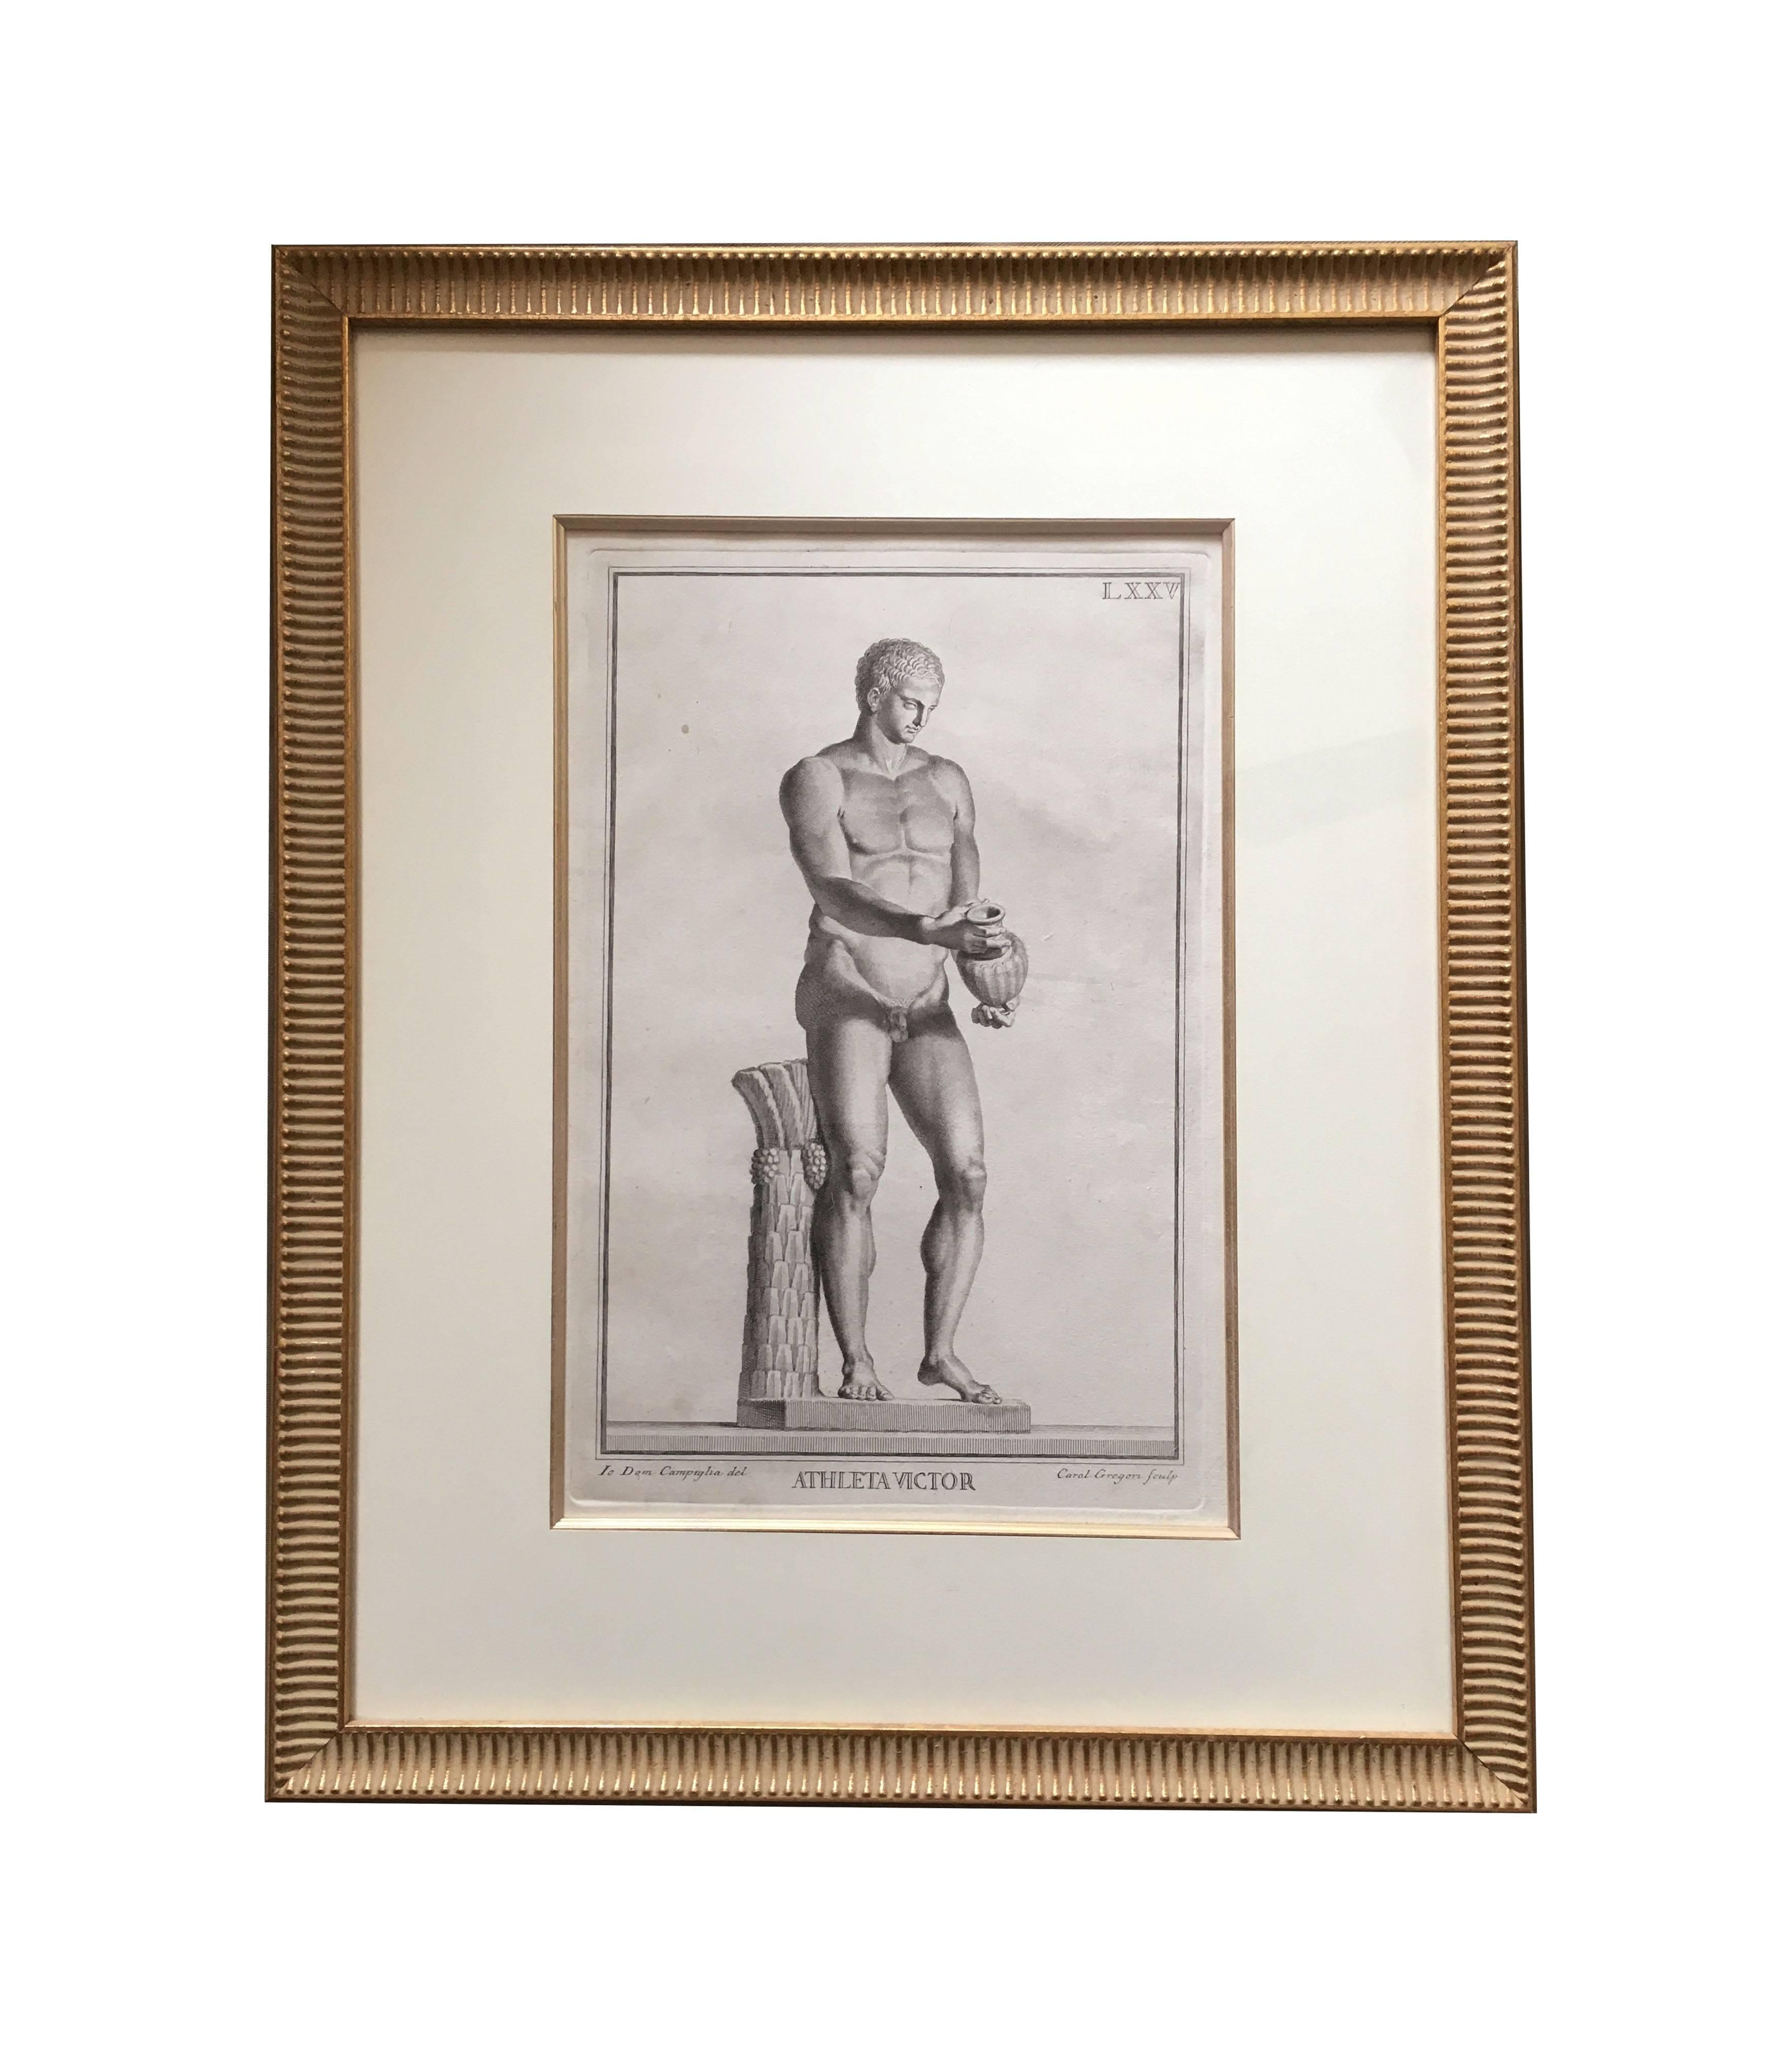 Four beautiful framed copper plate etchings prepared after drawings by Giovanni Domenico Campiglia born in Lucca in 1692. The engravings were published in Museo Fioerintino out of Rome in 1760. The engravings printed in the work were executed by